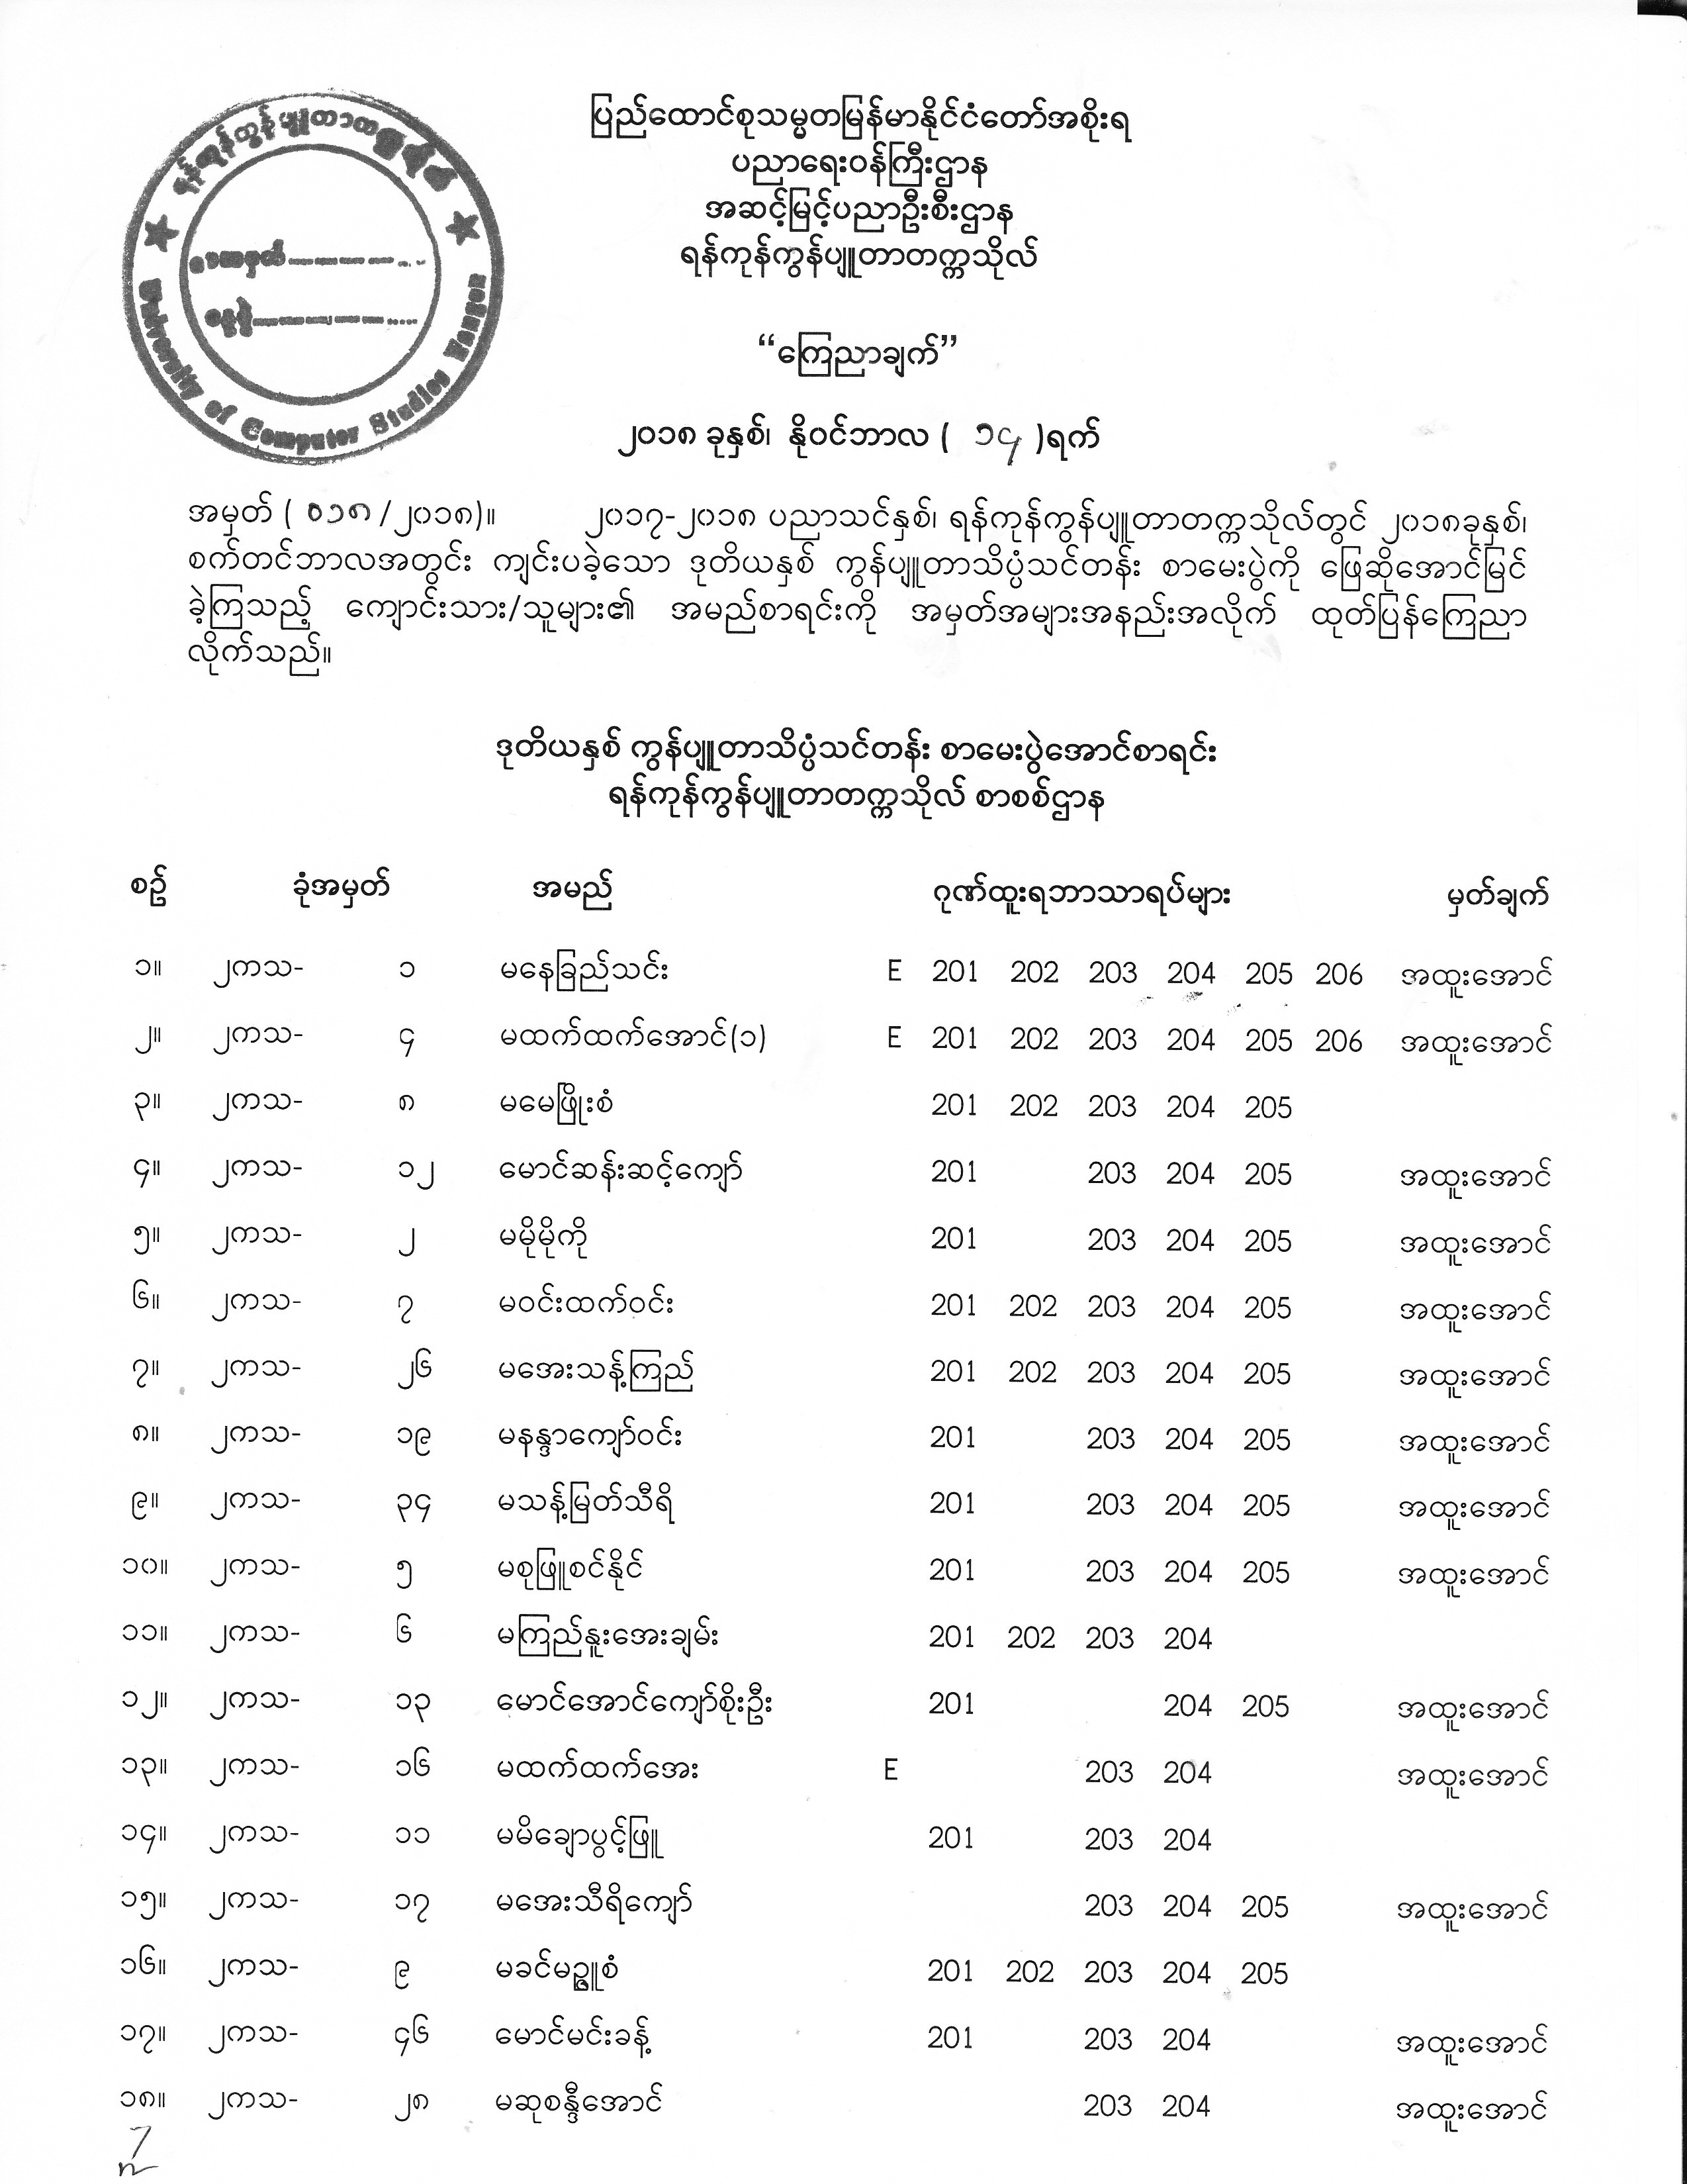 Second Year Exam Result